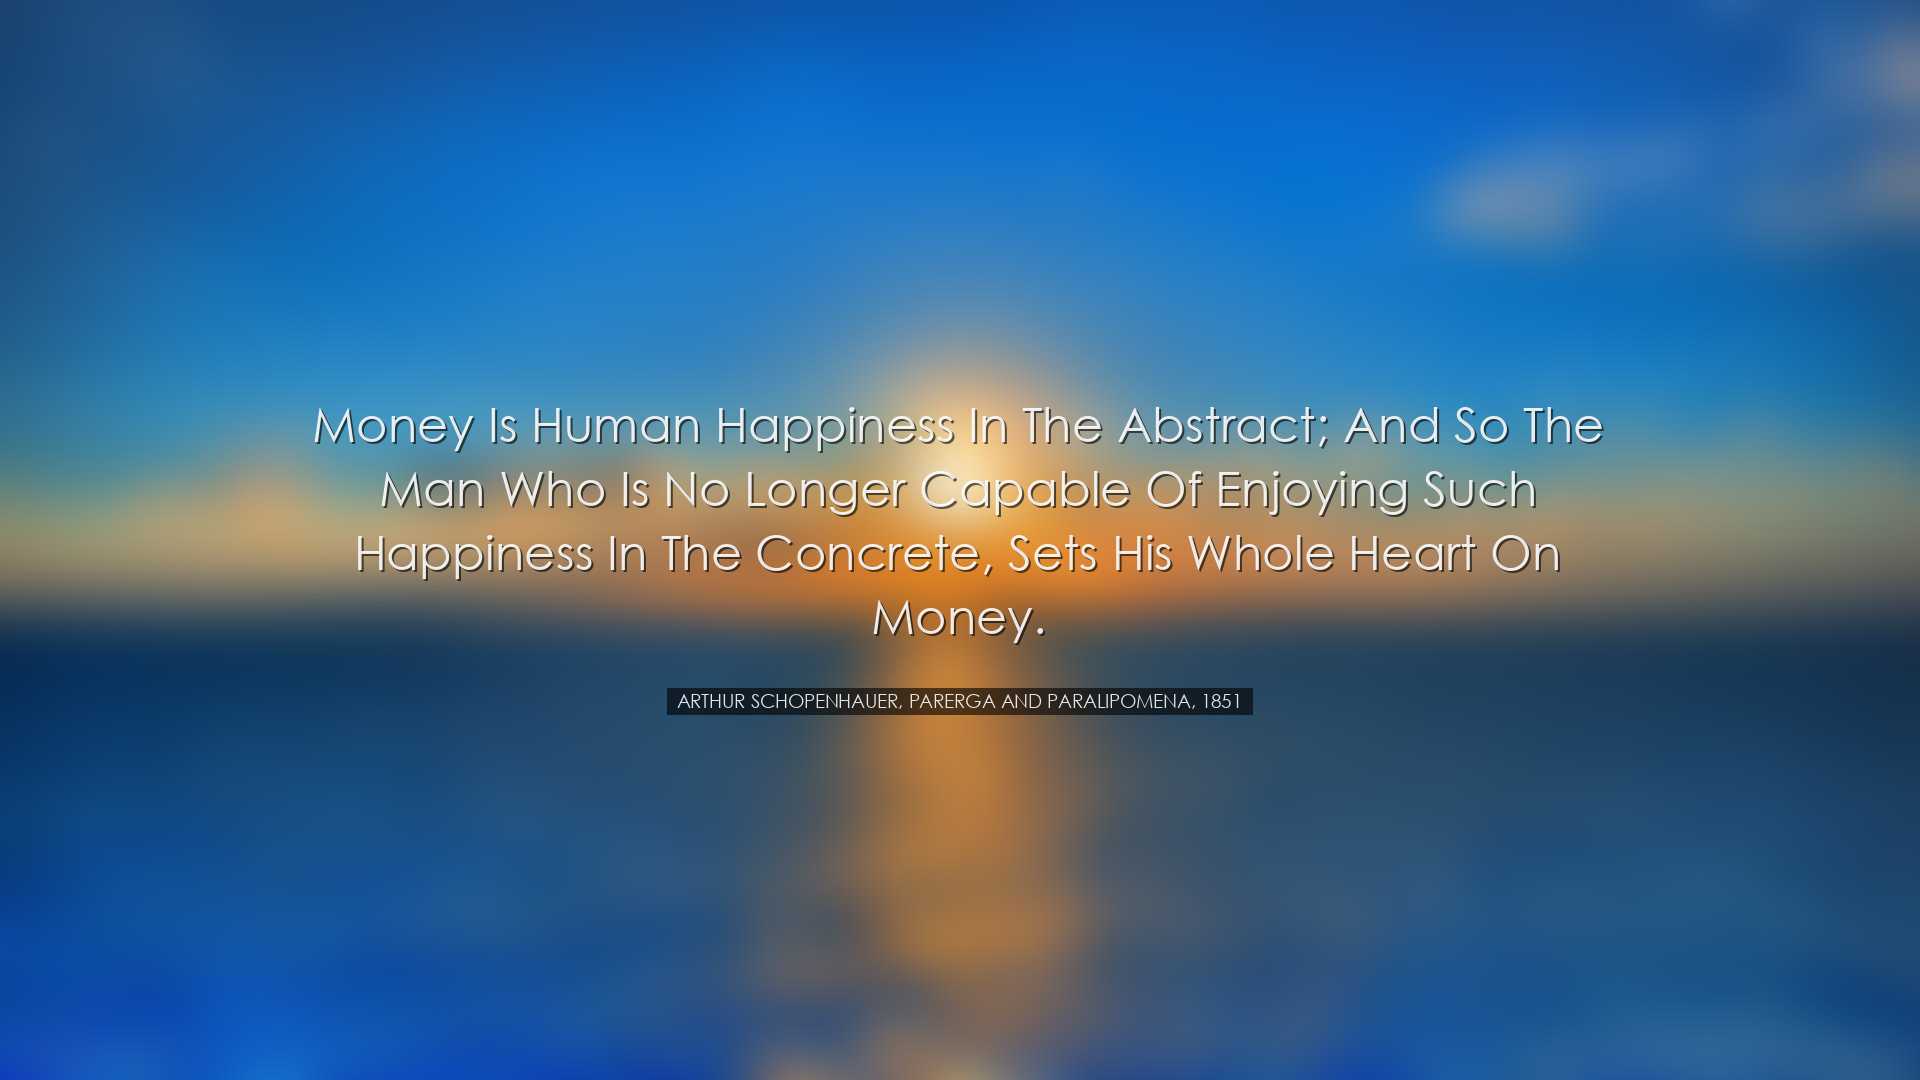 Money is human happiness in the abstract; and so the man who is no